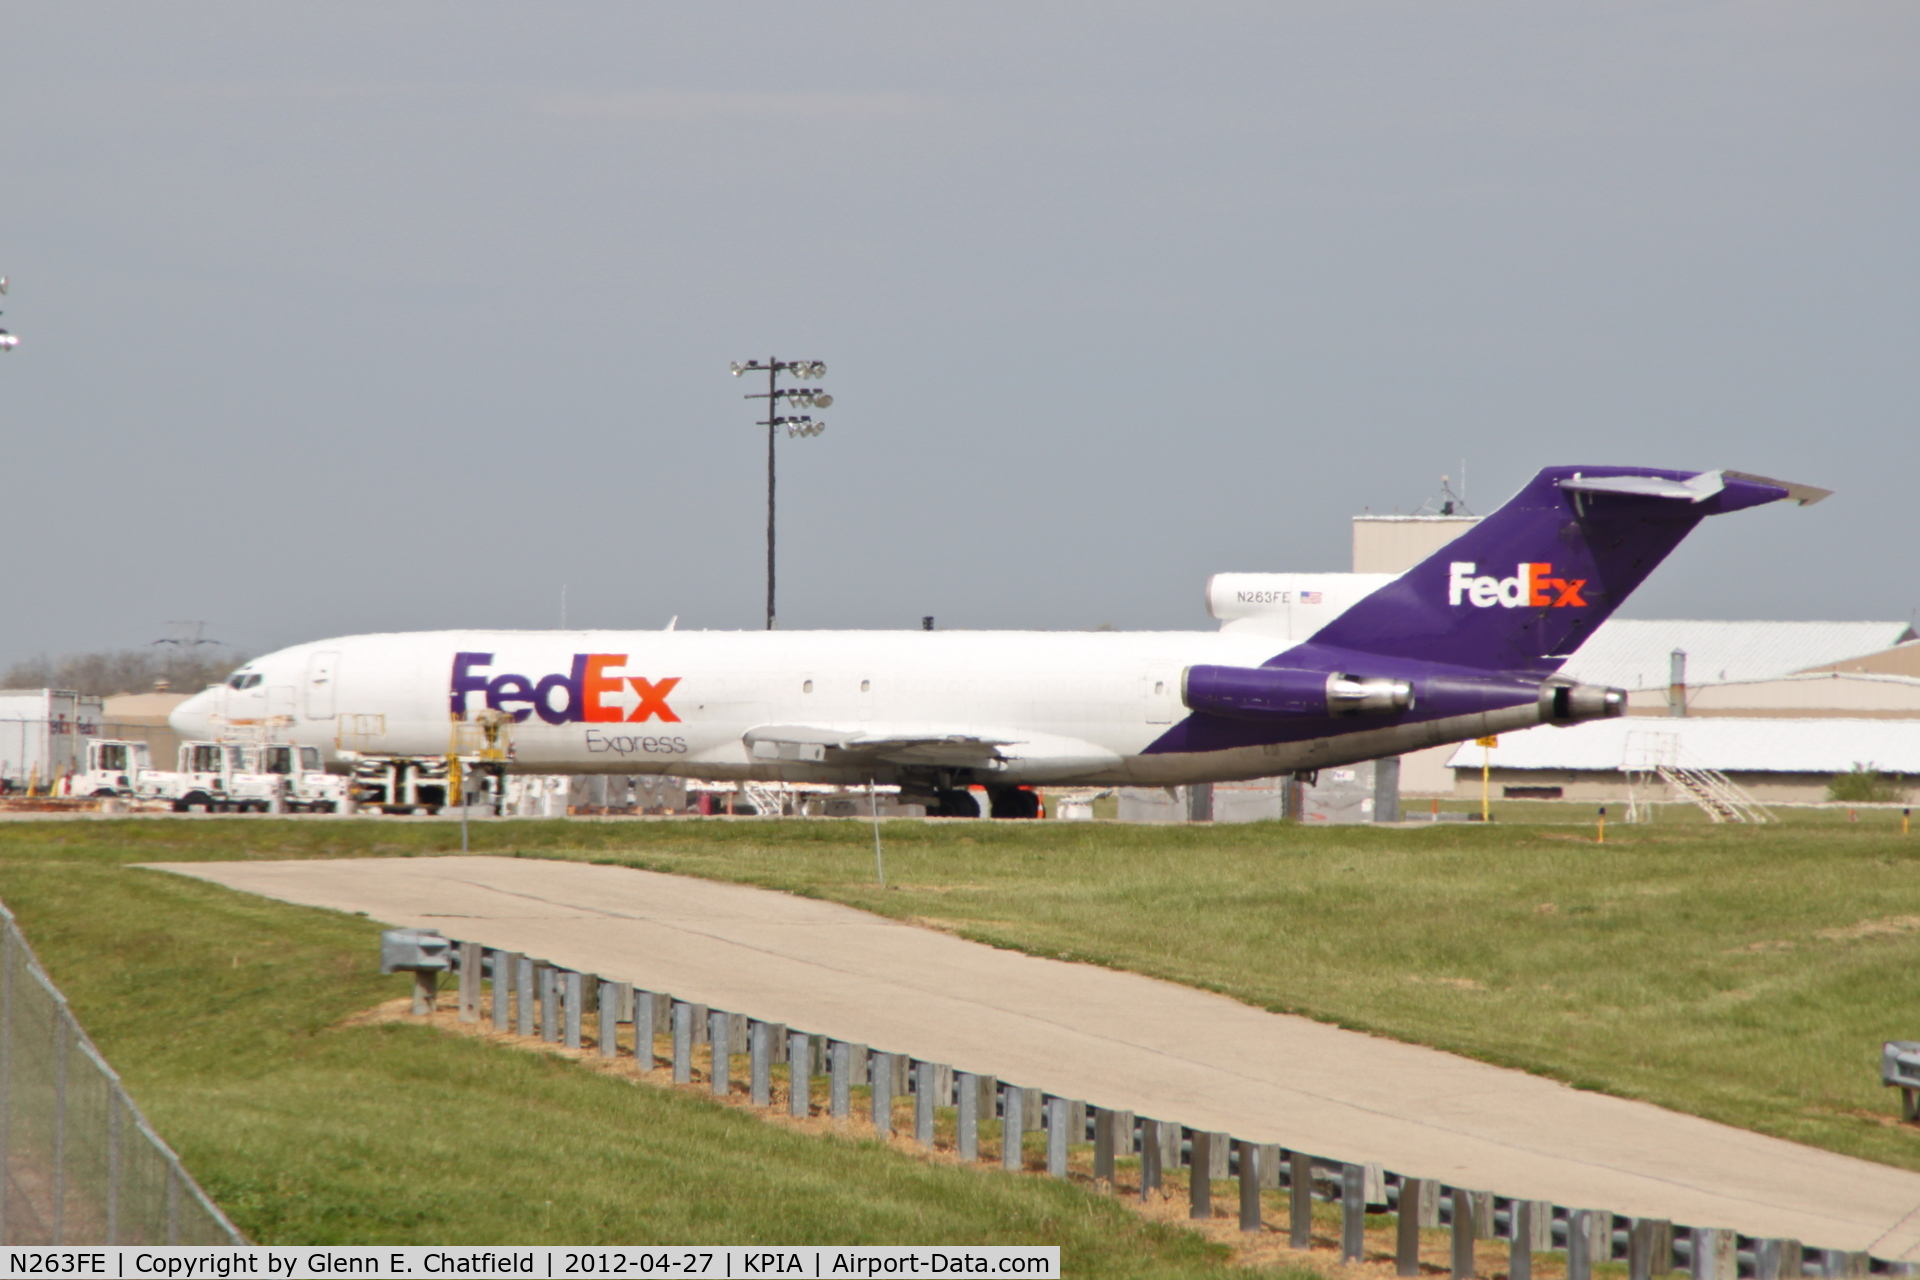 N263FE, 1979 Boeing 727-233F C/N 21625, At the cargo area, seen from the road.